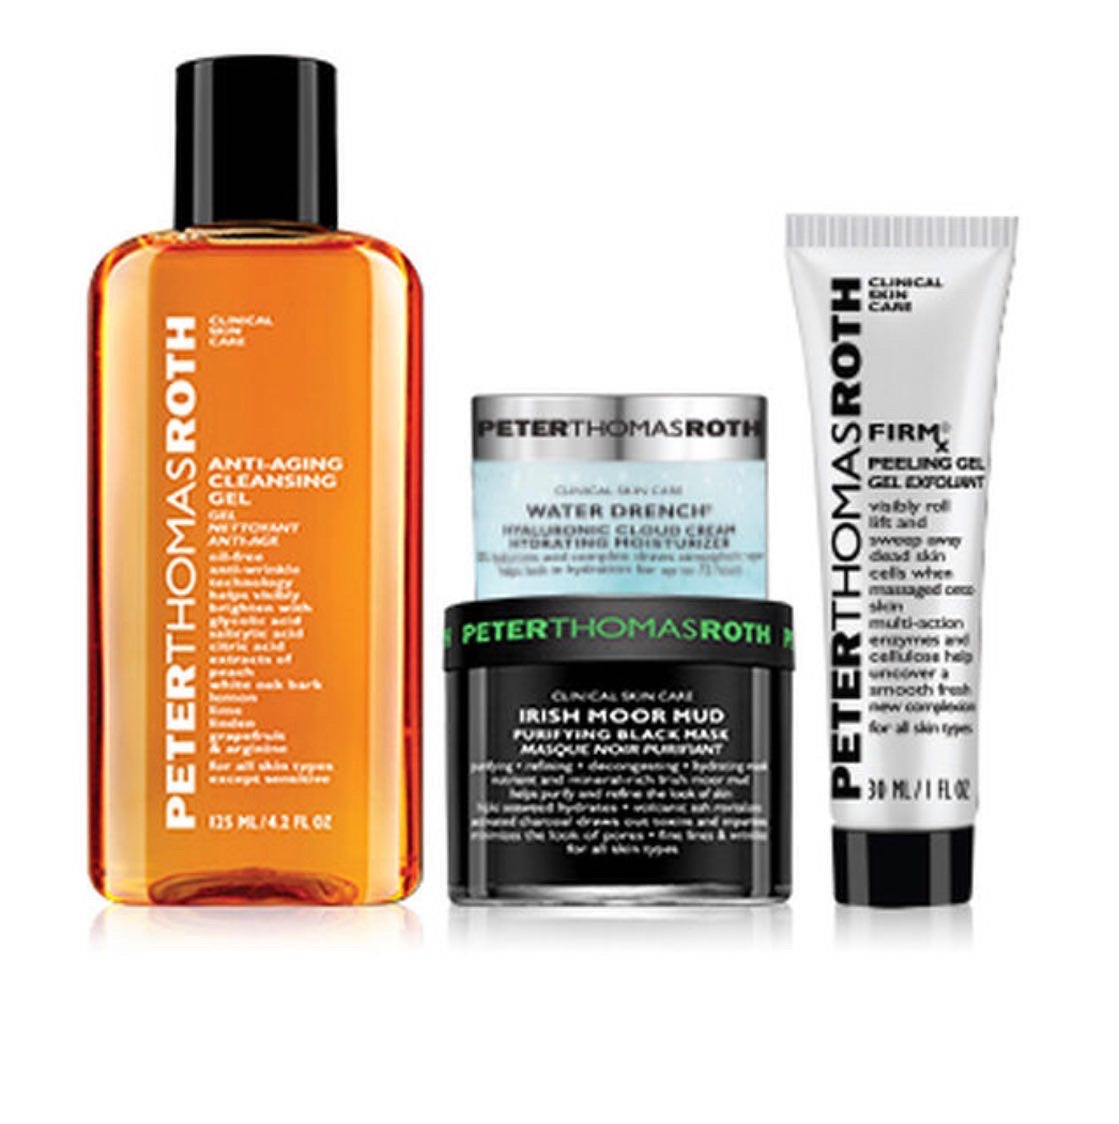 PETER THOMAS ROTH, PETERS PICKS FOR THE GIRL 4 PIECE KIT